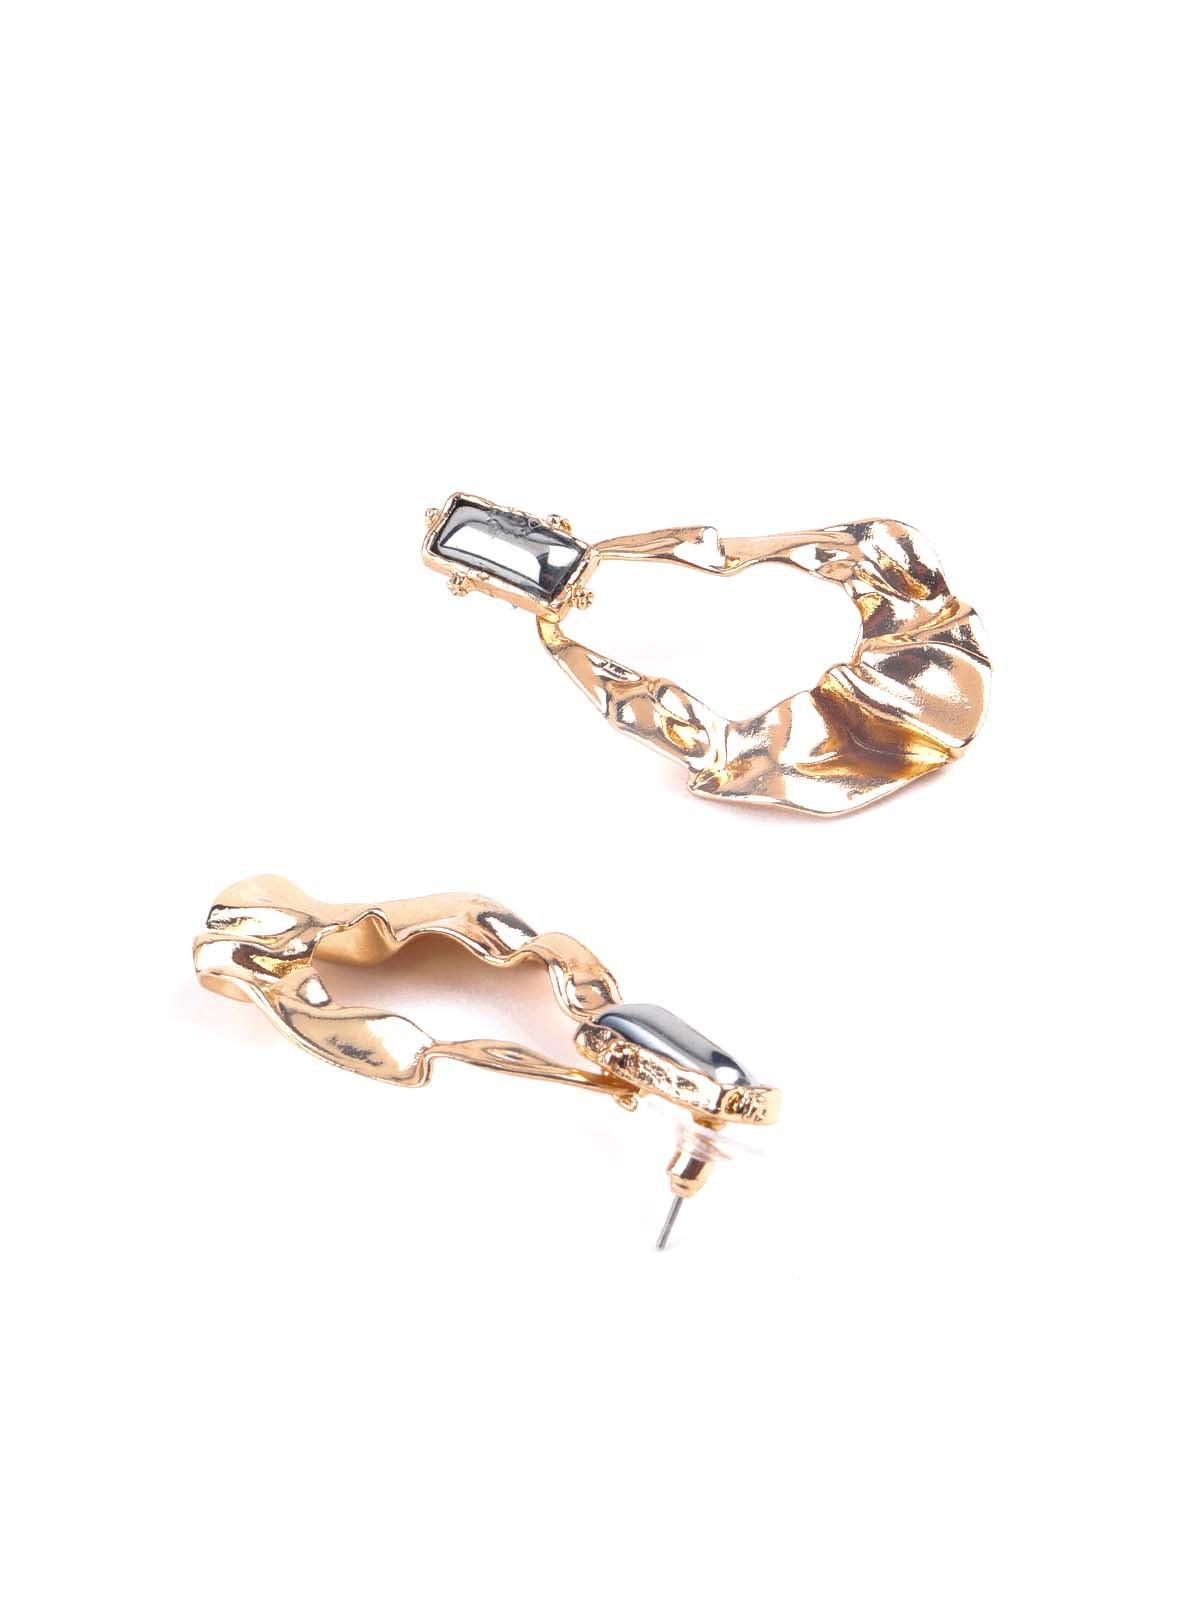 Exquisite Gold textured drop earrings - Odette